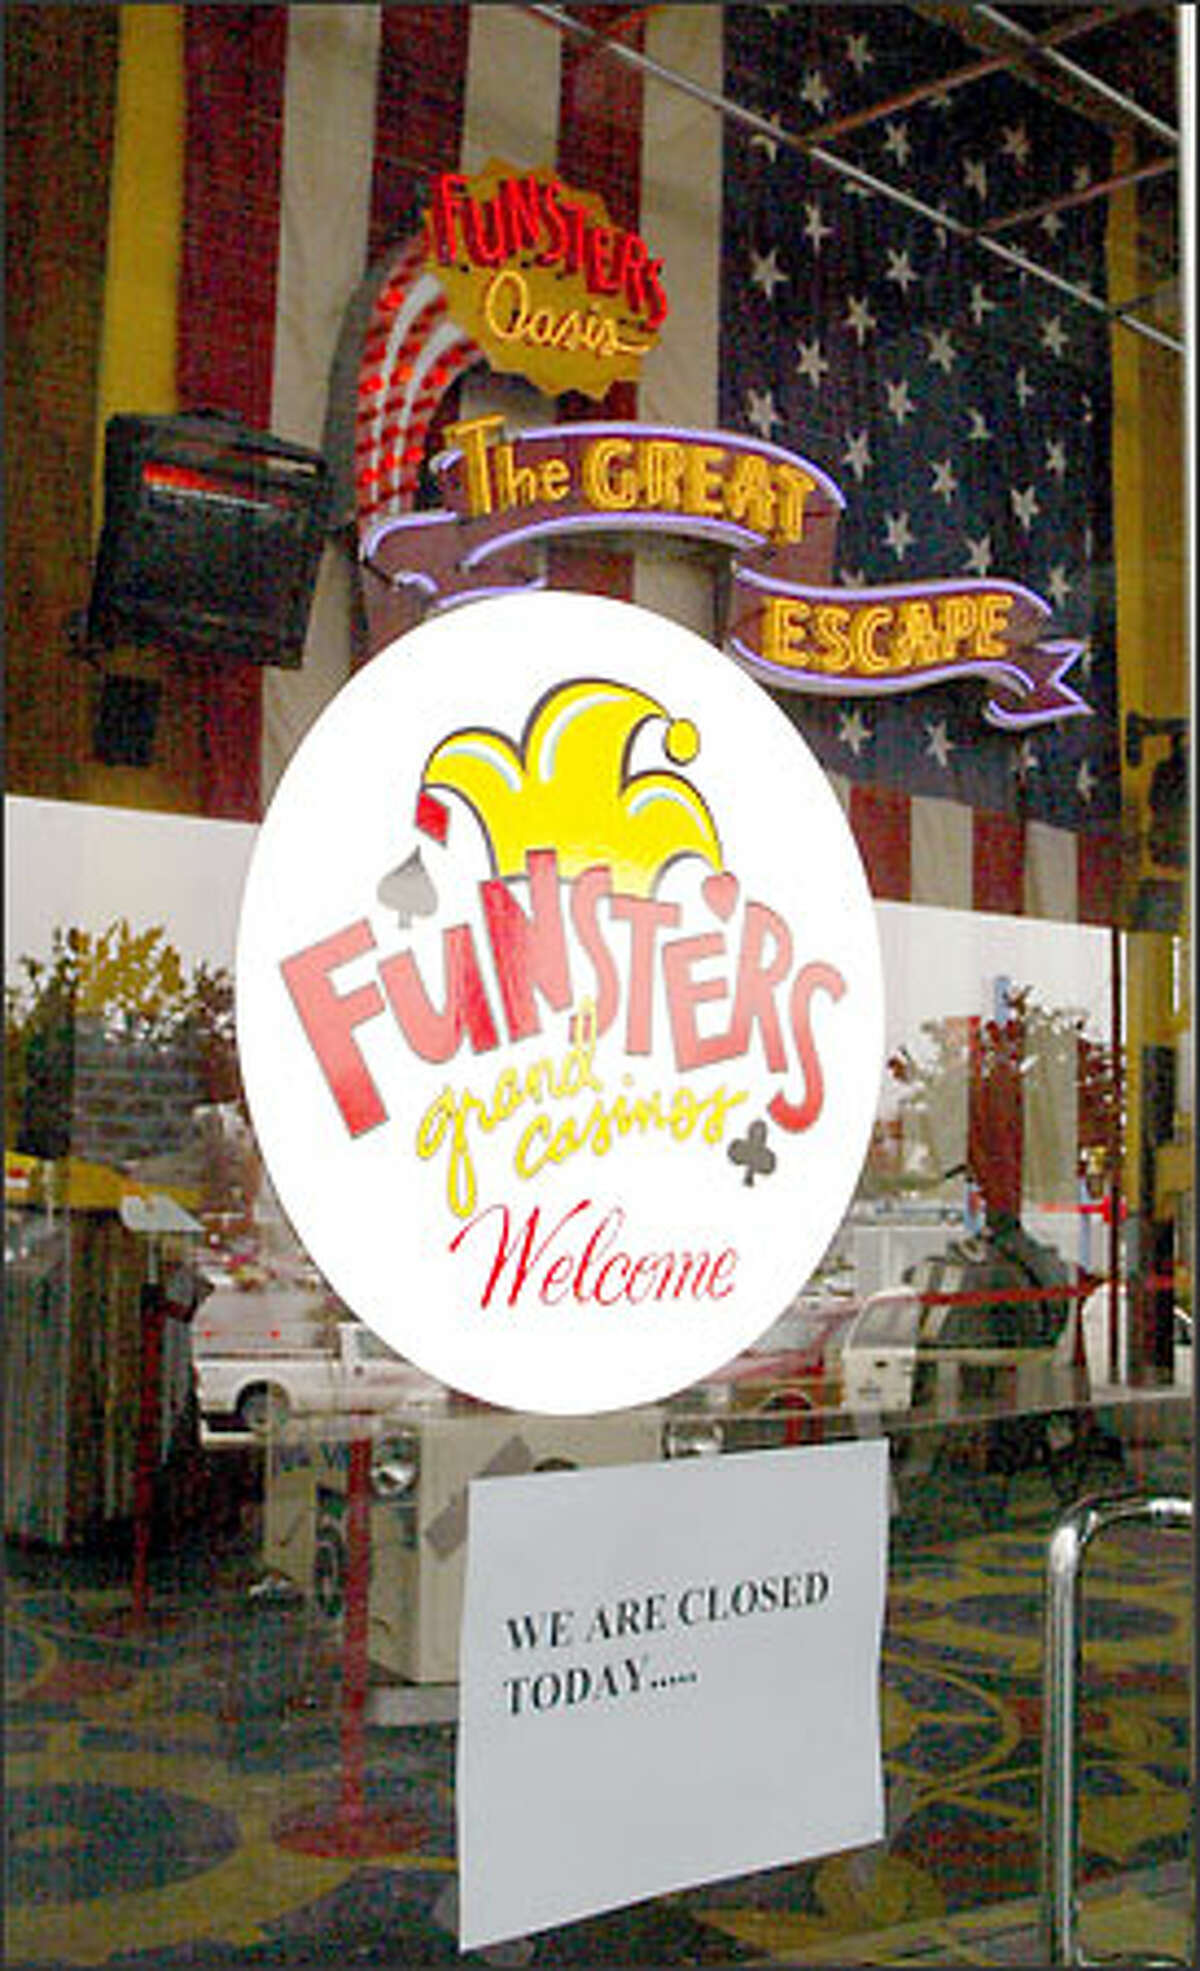 Funsters Grand Casino was closed yesterday shortly after the Department of Justice appointed a trustee for the company’s Chapter 7 case. A judge removed the business from Chapter 11 protection against its will.